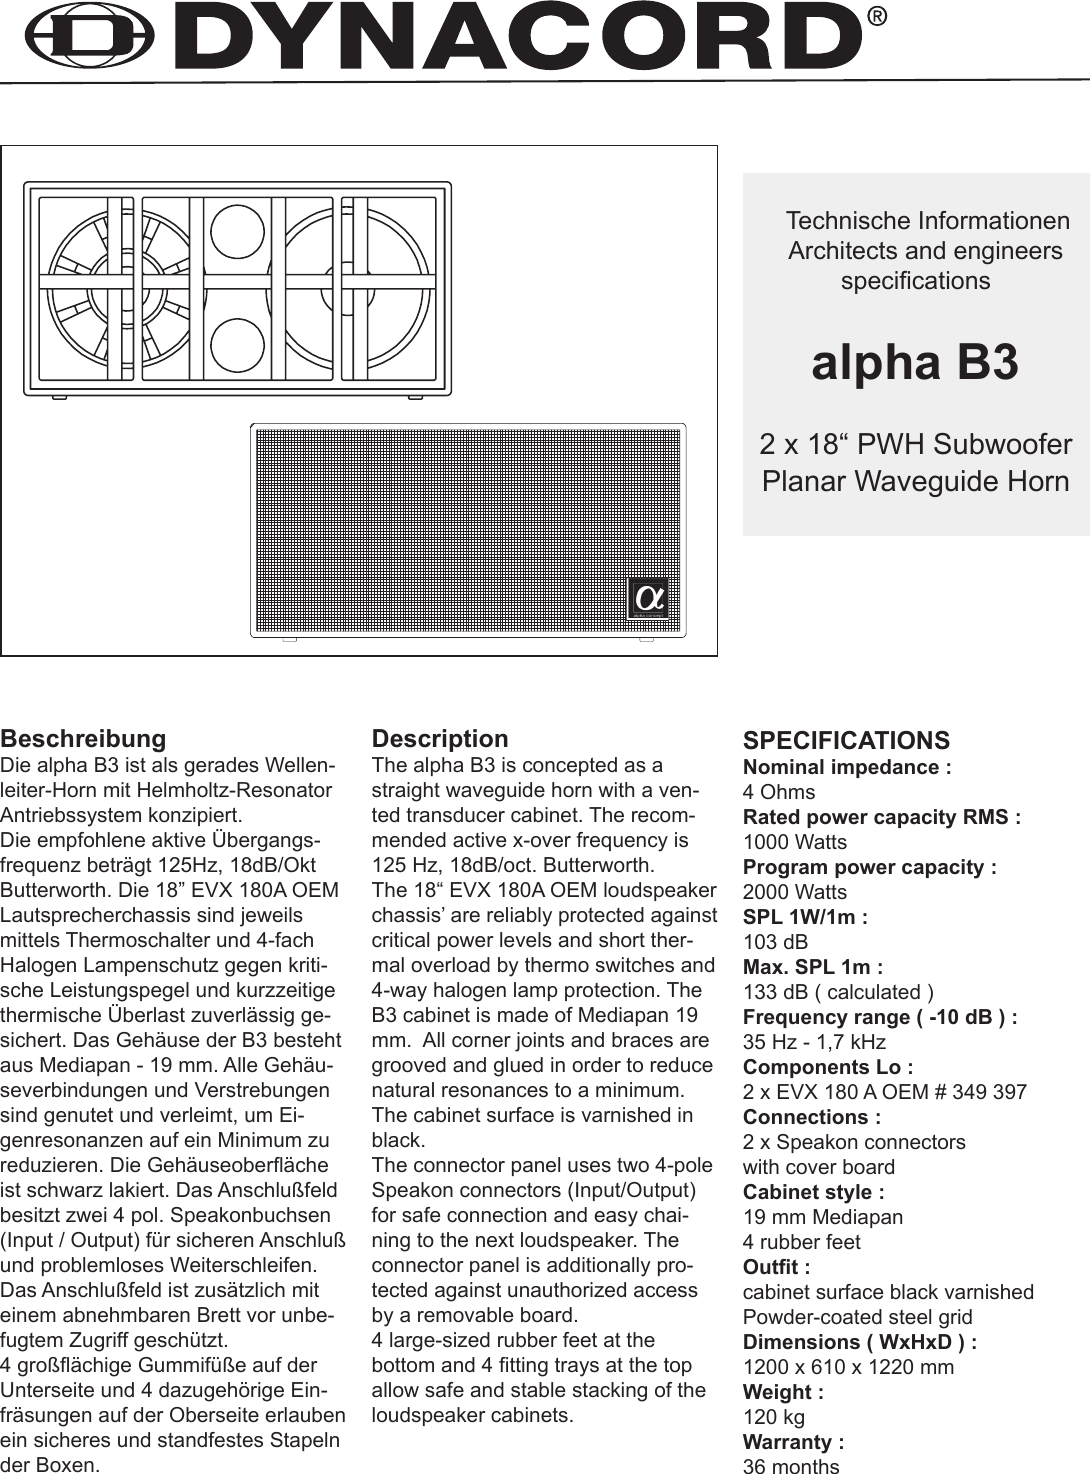 Page 1 of 2 - Dynacord Alpha B3 User Manual  To The 60ab1a2d-67cf-40d6-9cc6-6a99514e991e